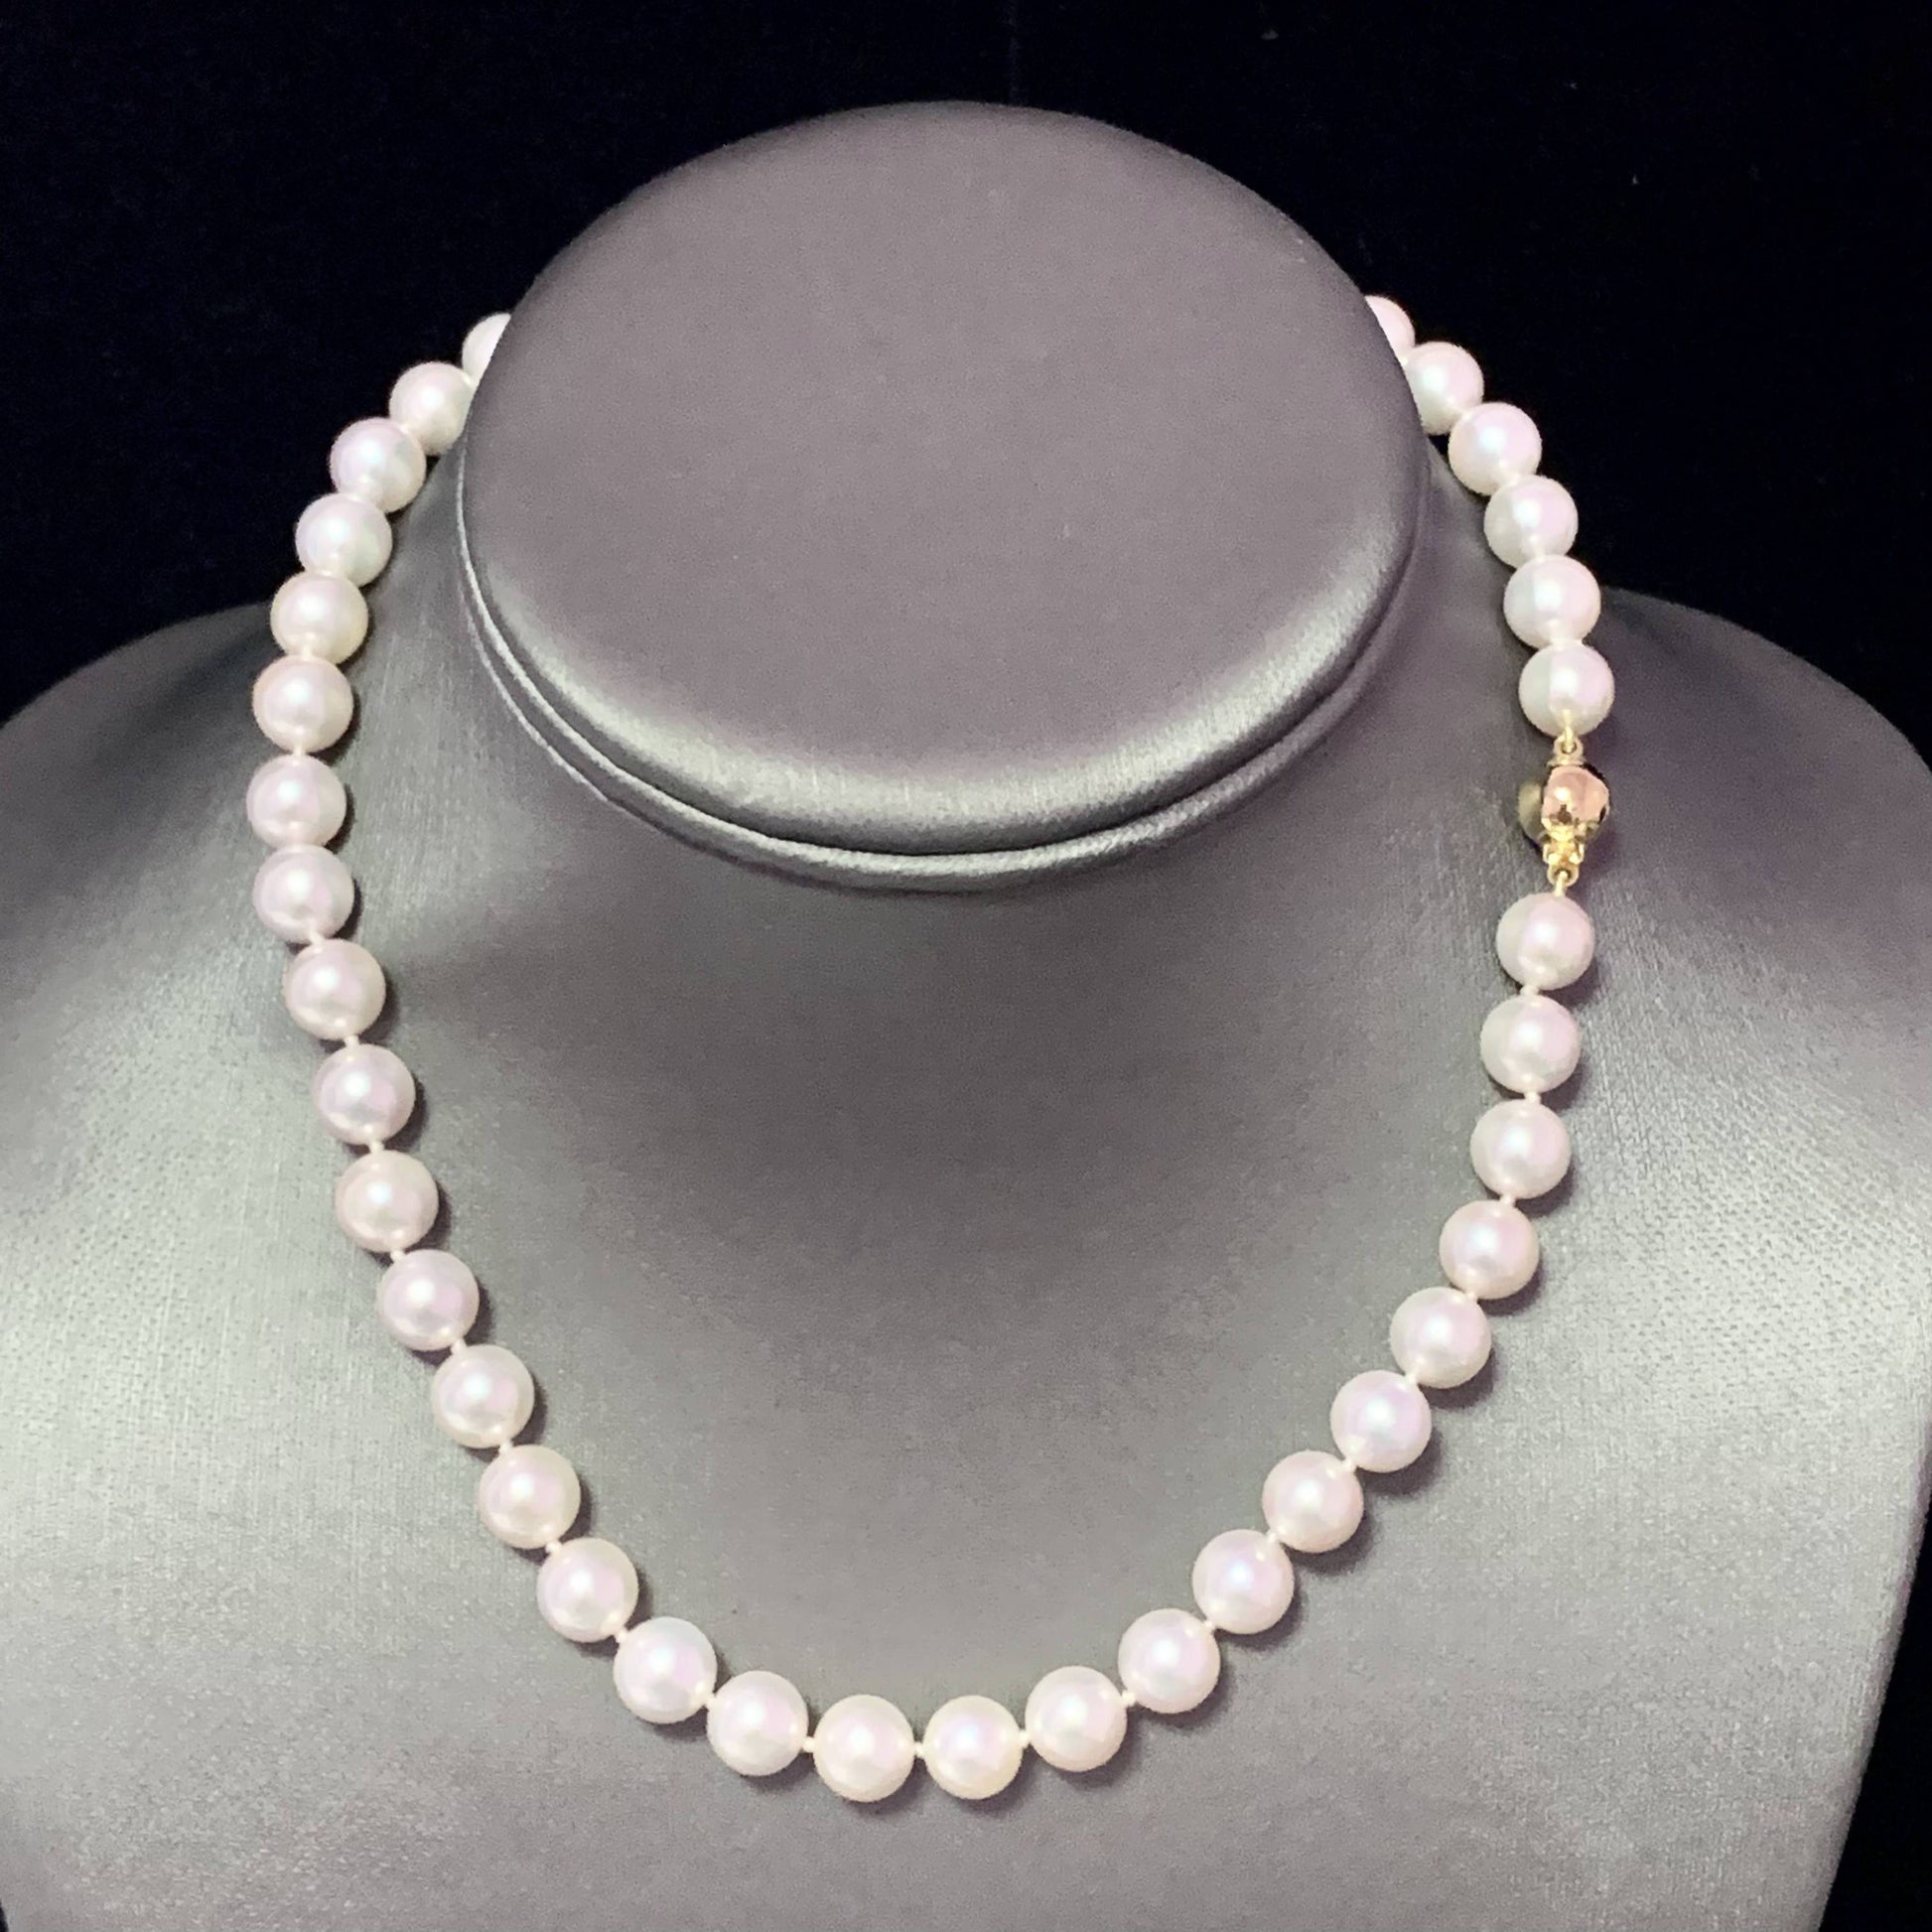 Akoya Pearl Necklace 14k Yellow Gold 8.5 mm 16" Certified $3,950 111841 - Certified Estate Jewelry